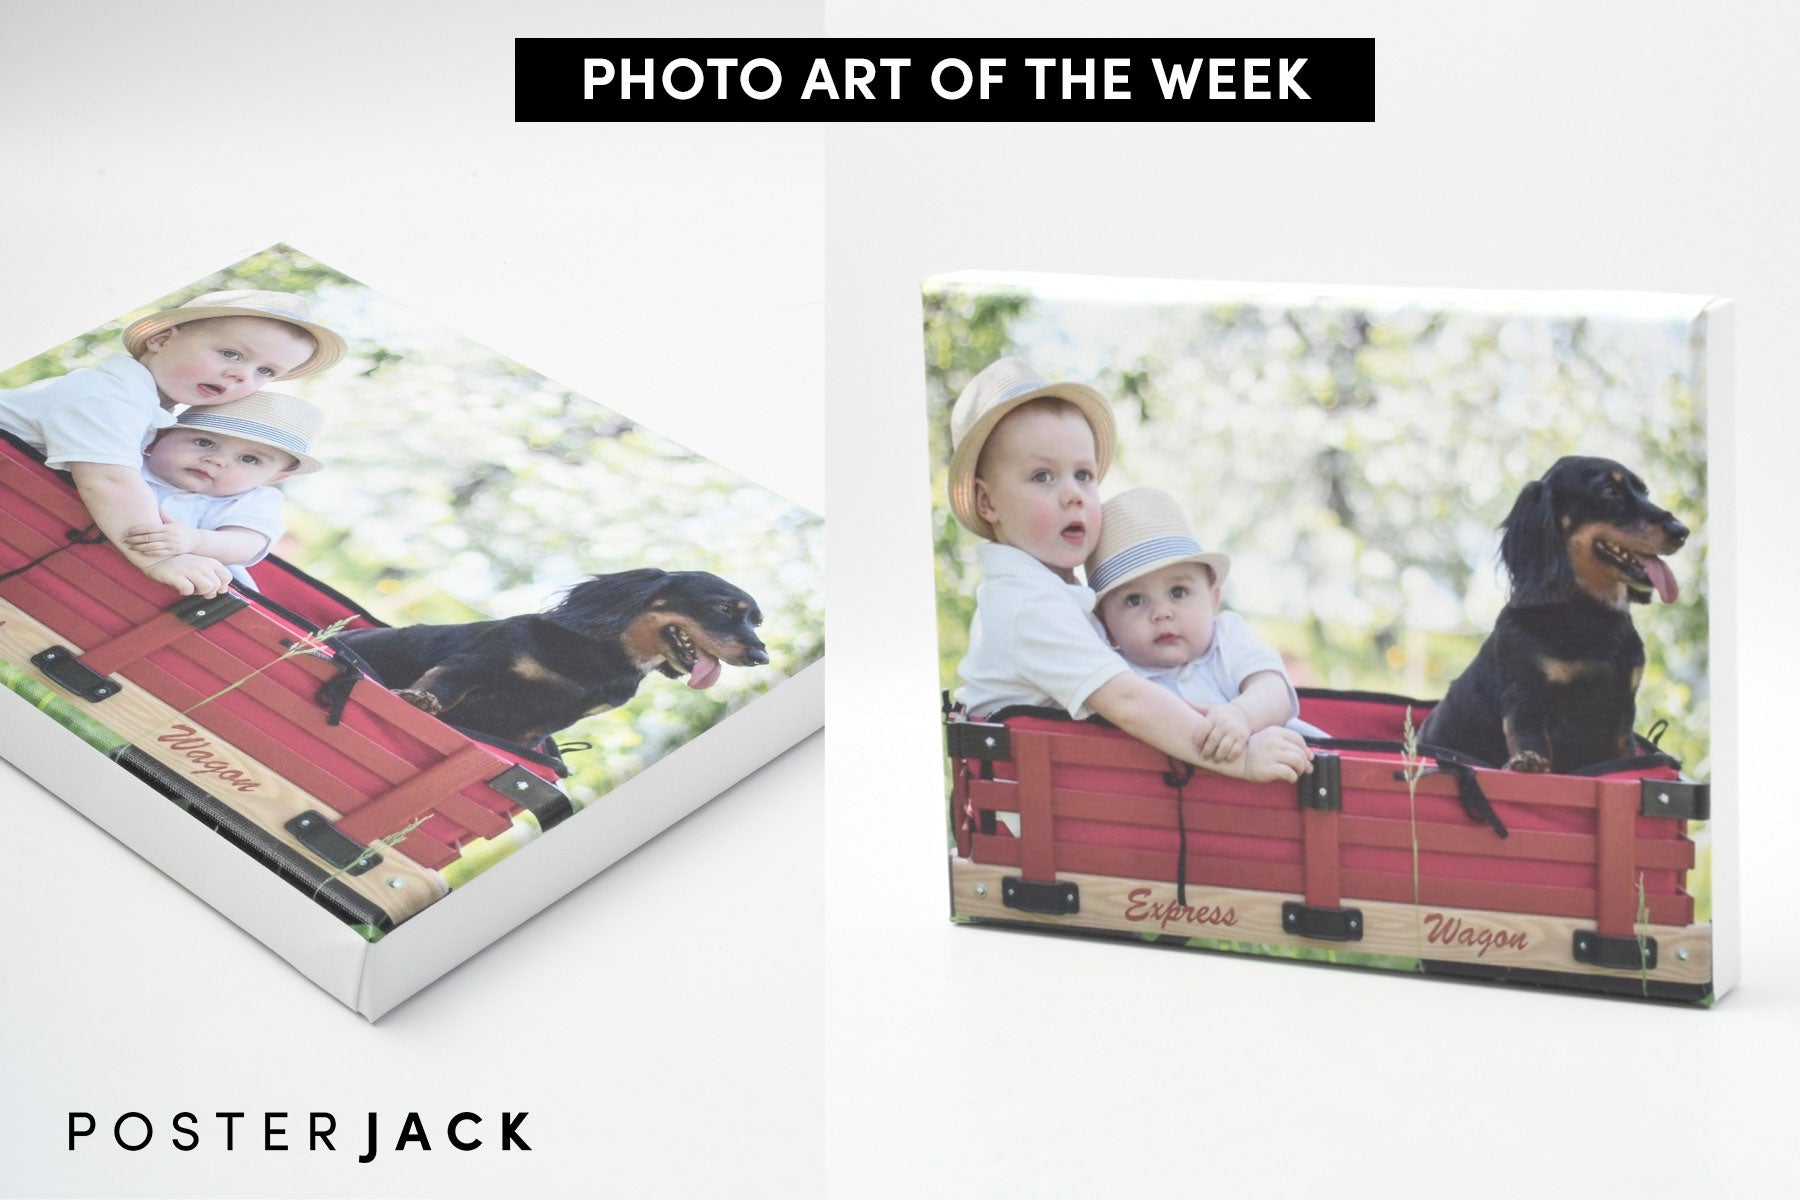 Posterjack Photo Art of The Week Canvas Print of Brothers and Dog in Wagon